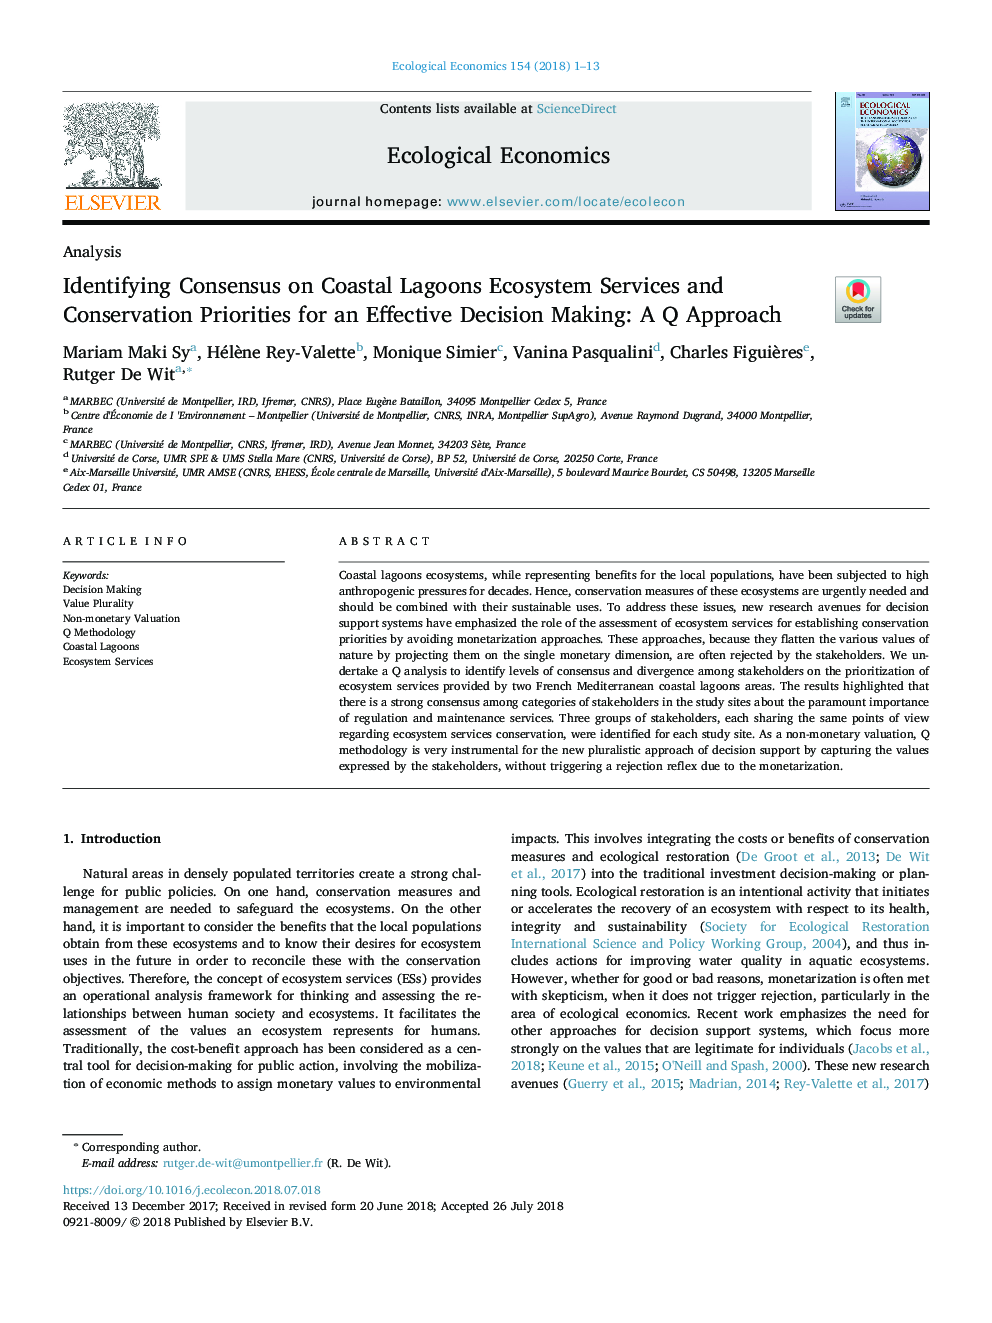 Identifying Consensus on Coastal Lagoons Ecosystem Services and Conservation Priorities for an Effective Decision Making: A Q Approach